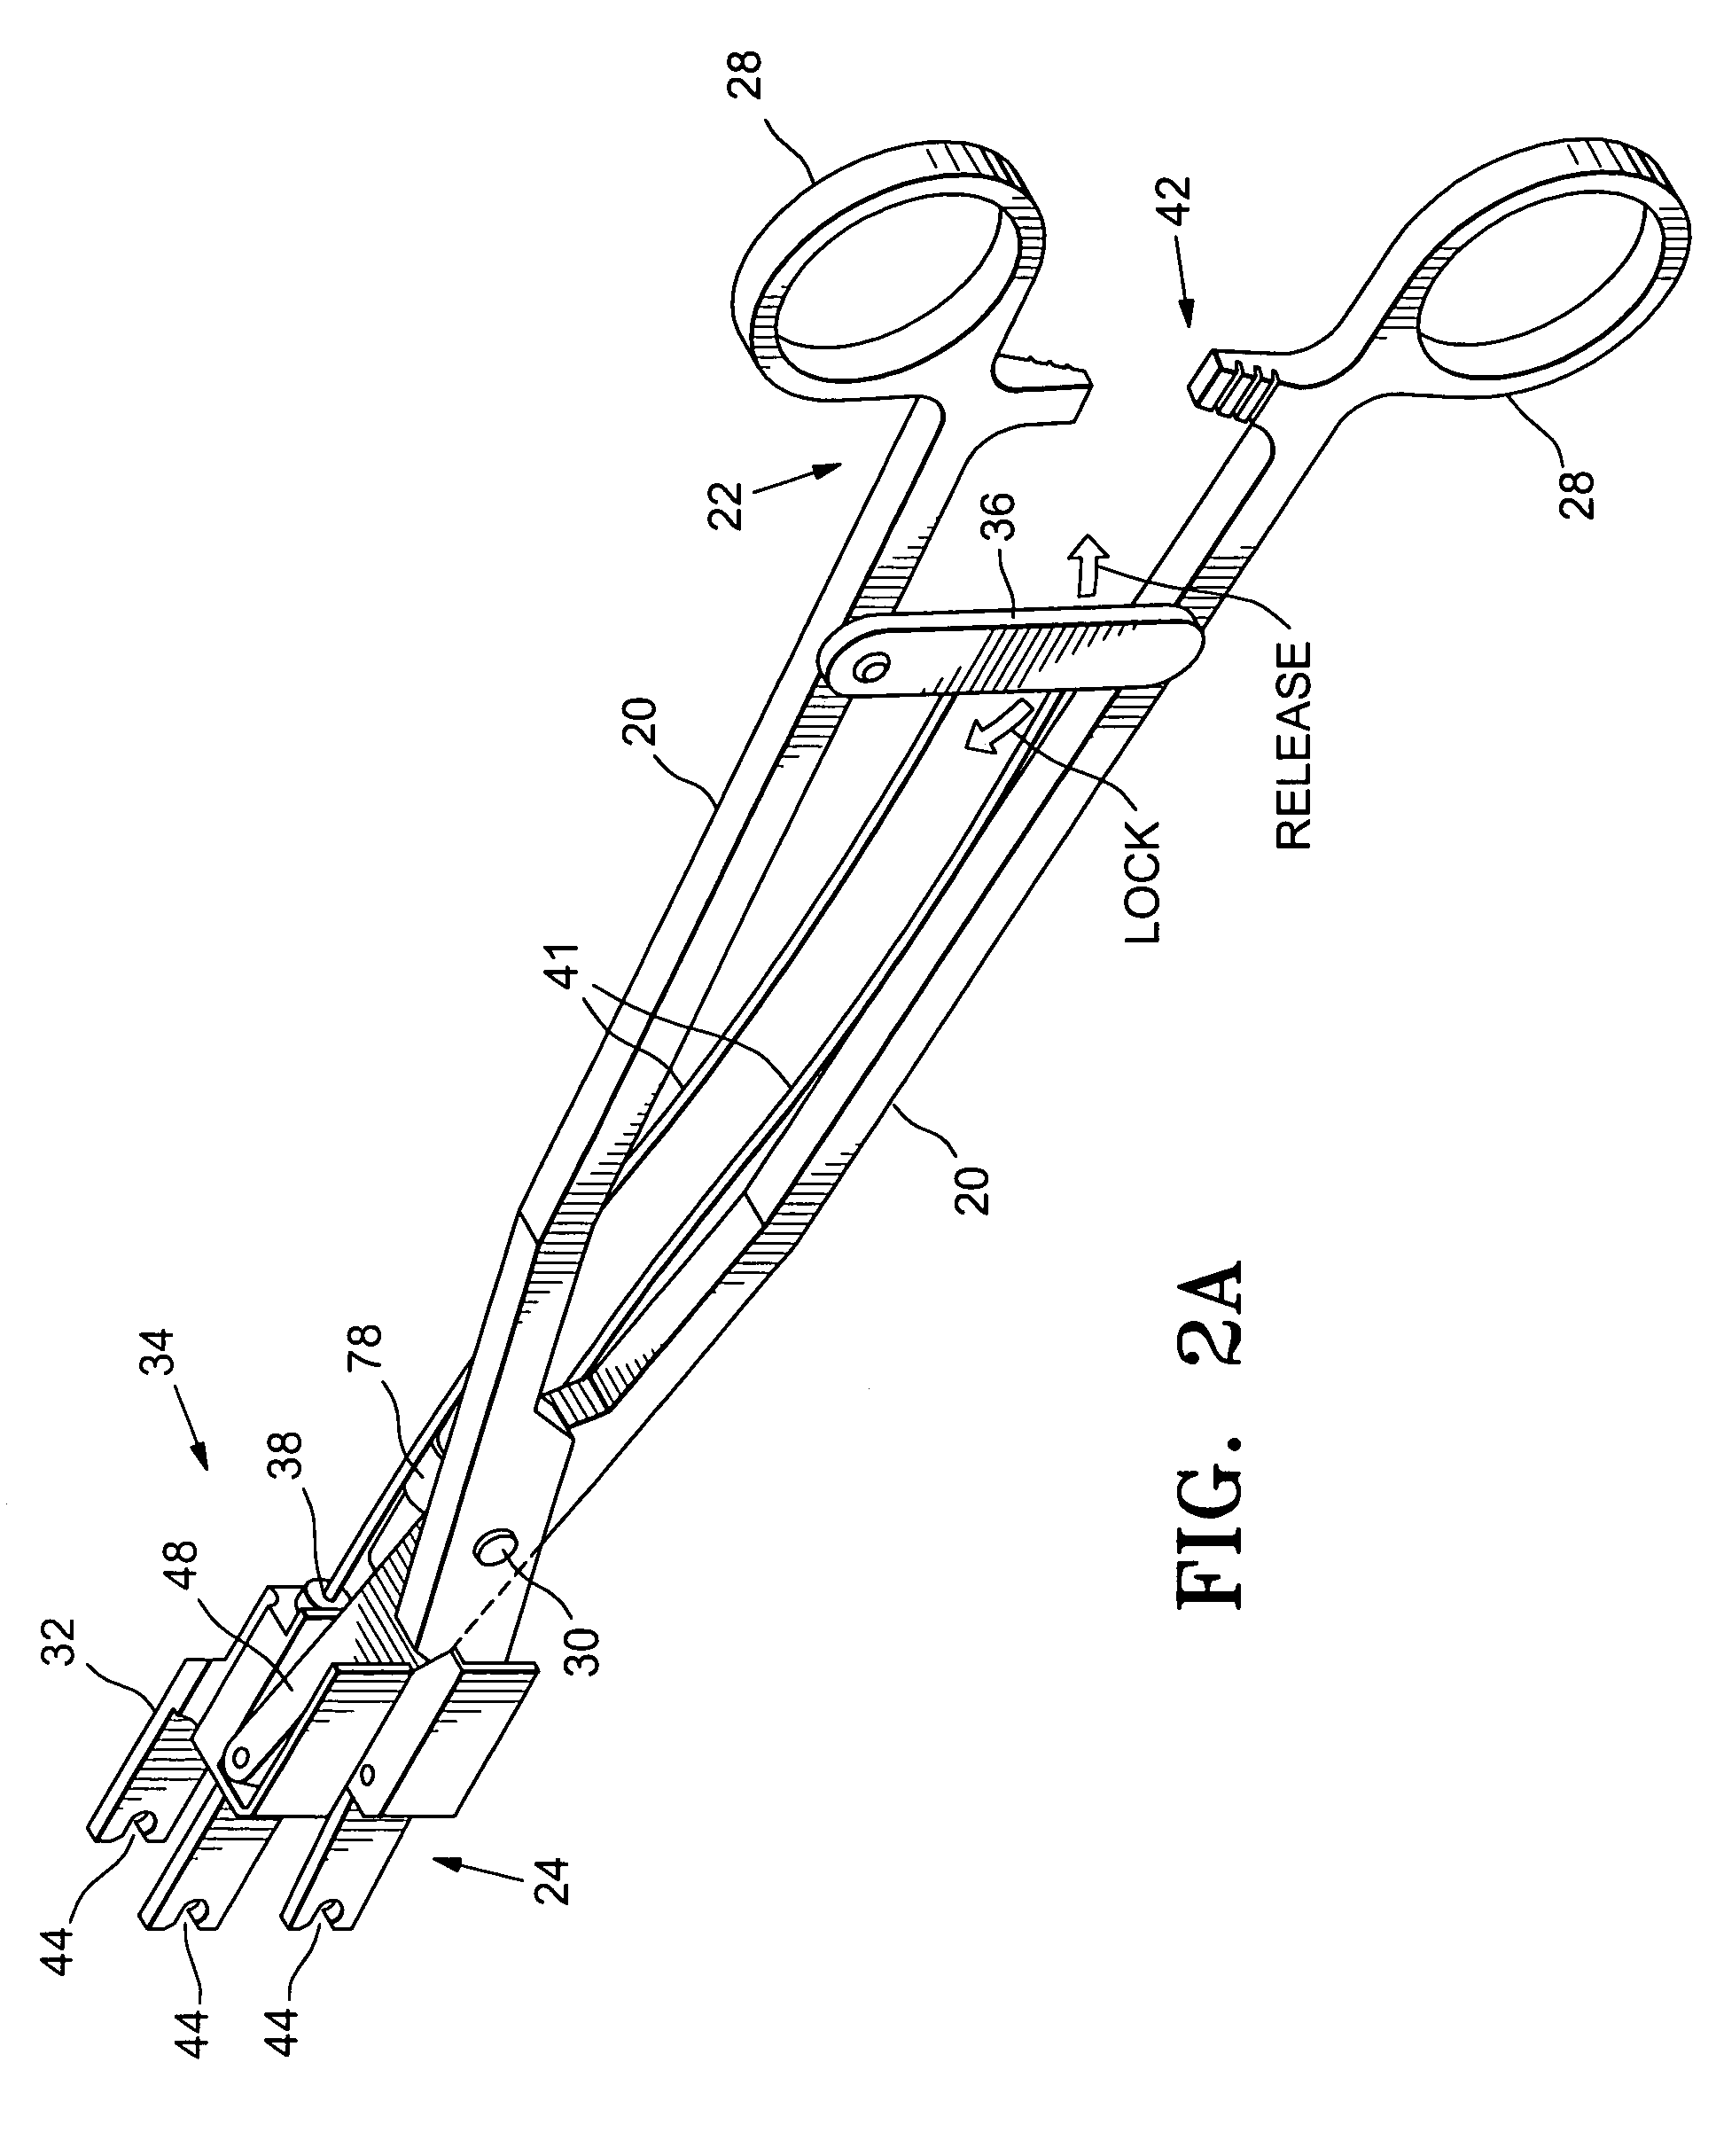 Occlusion device with deployable paddles for detection and occlusion of blood vessels